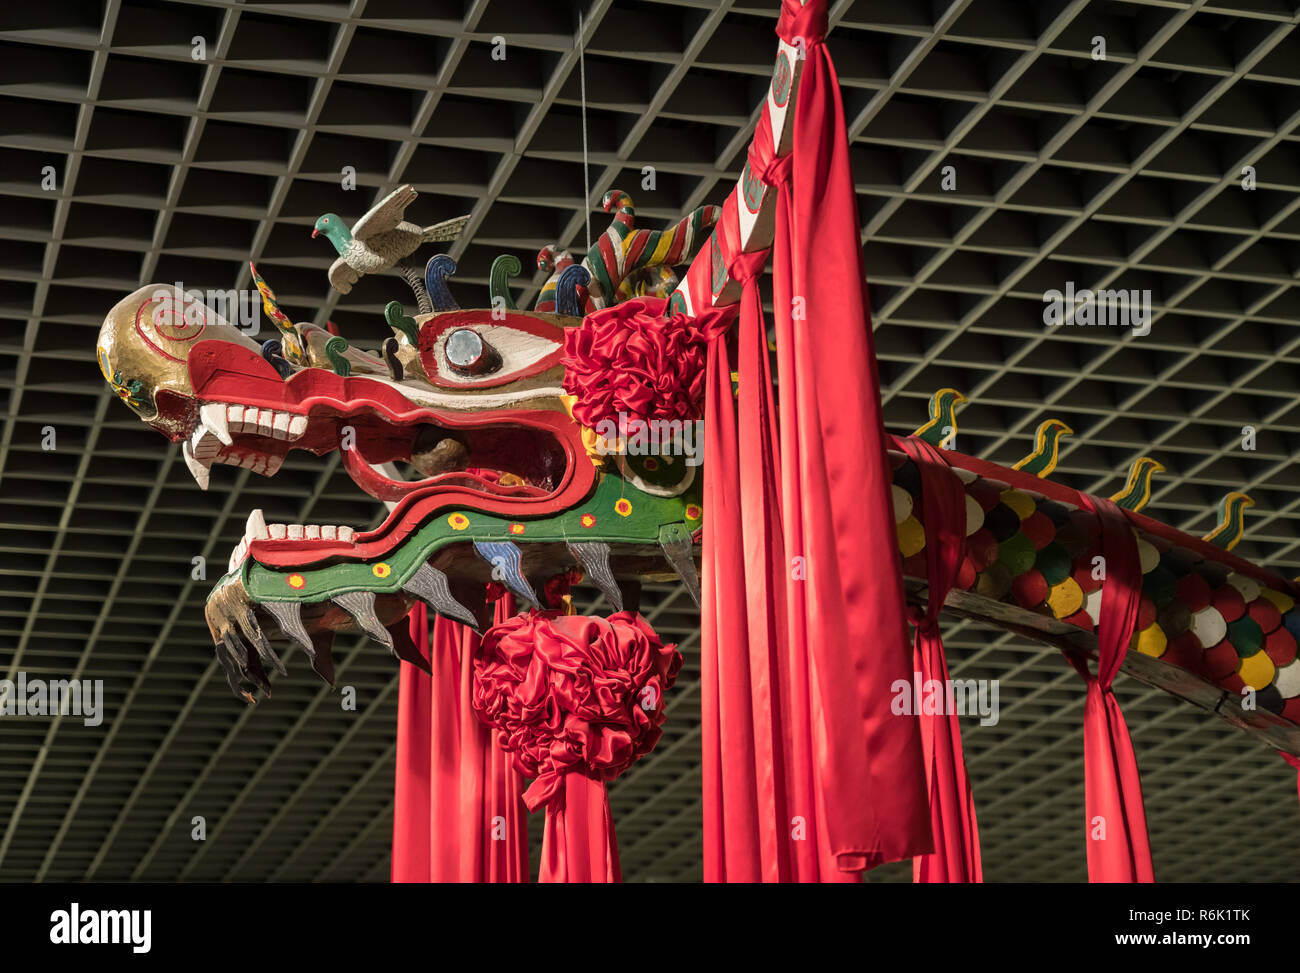 Artistic wooden dragon hanging from ceiling of museum Stock Photo